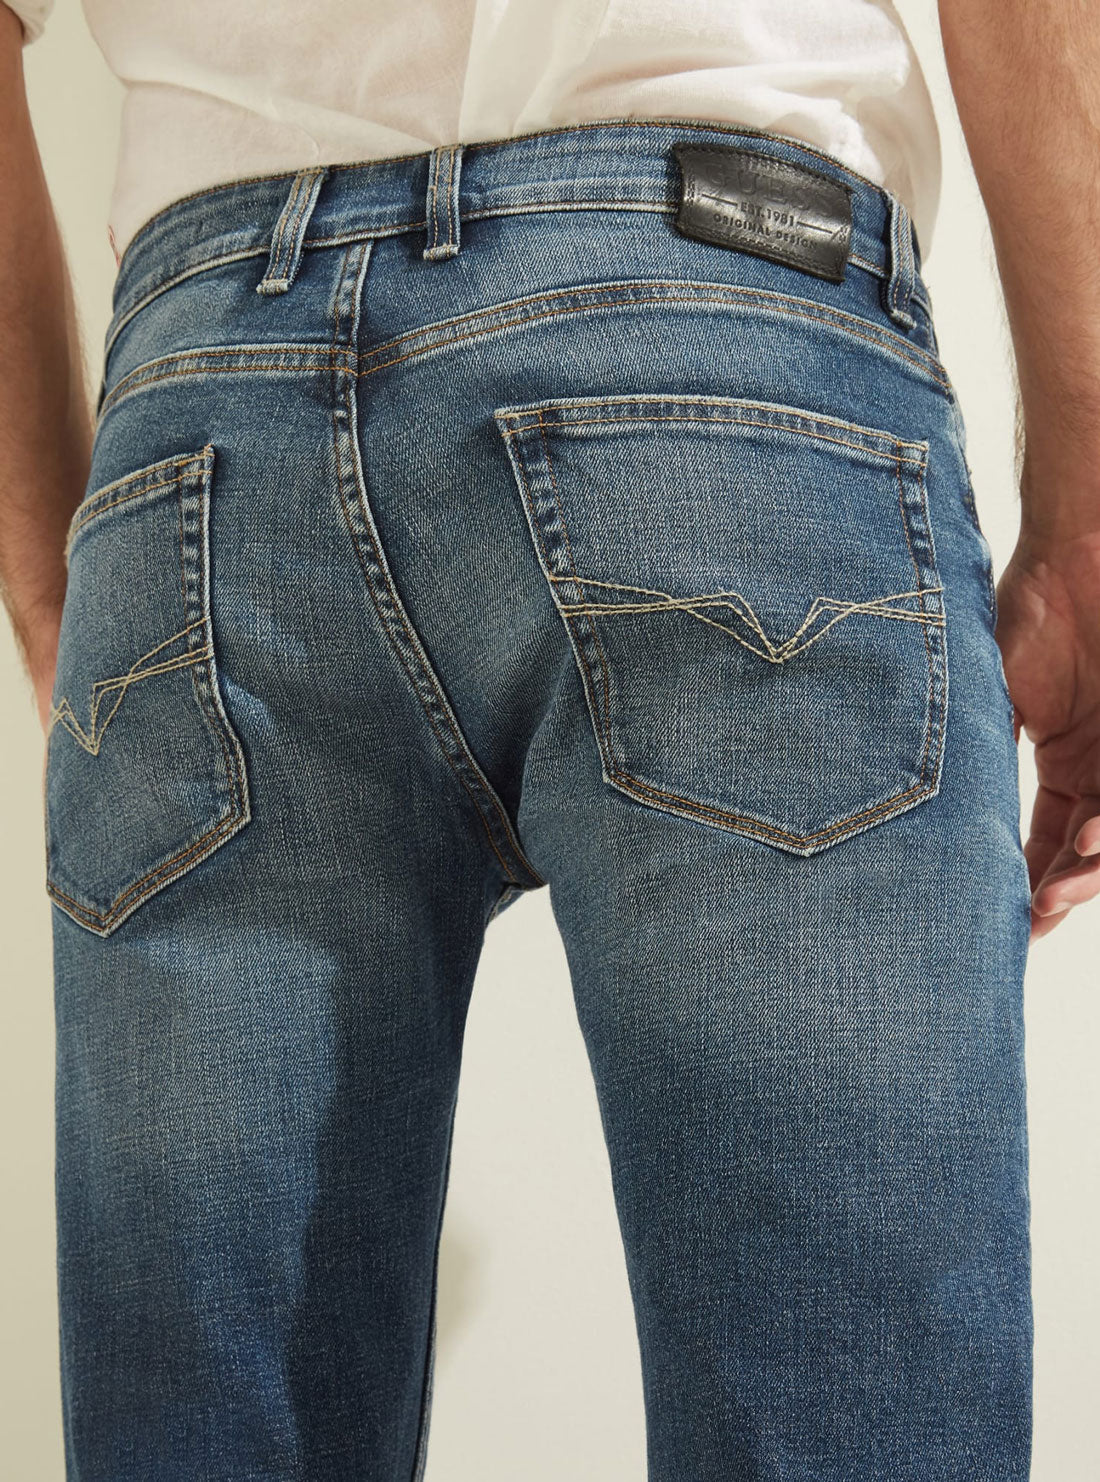 GUESS Mens Low-Rise Slim Straight Denim Jeans in Stratus Blue Wash MBGAS13041B Detail View